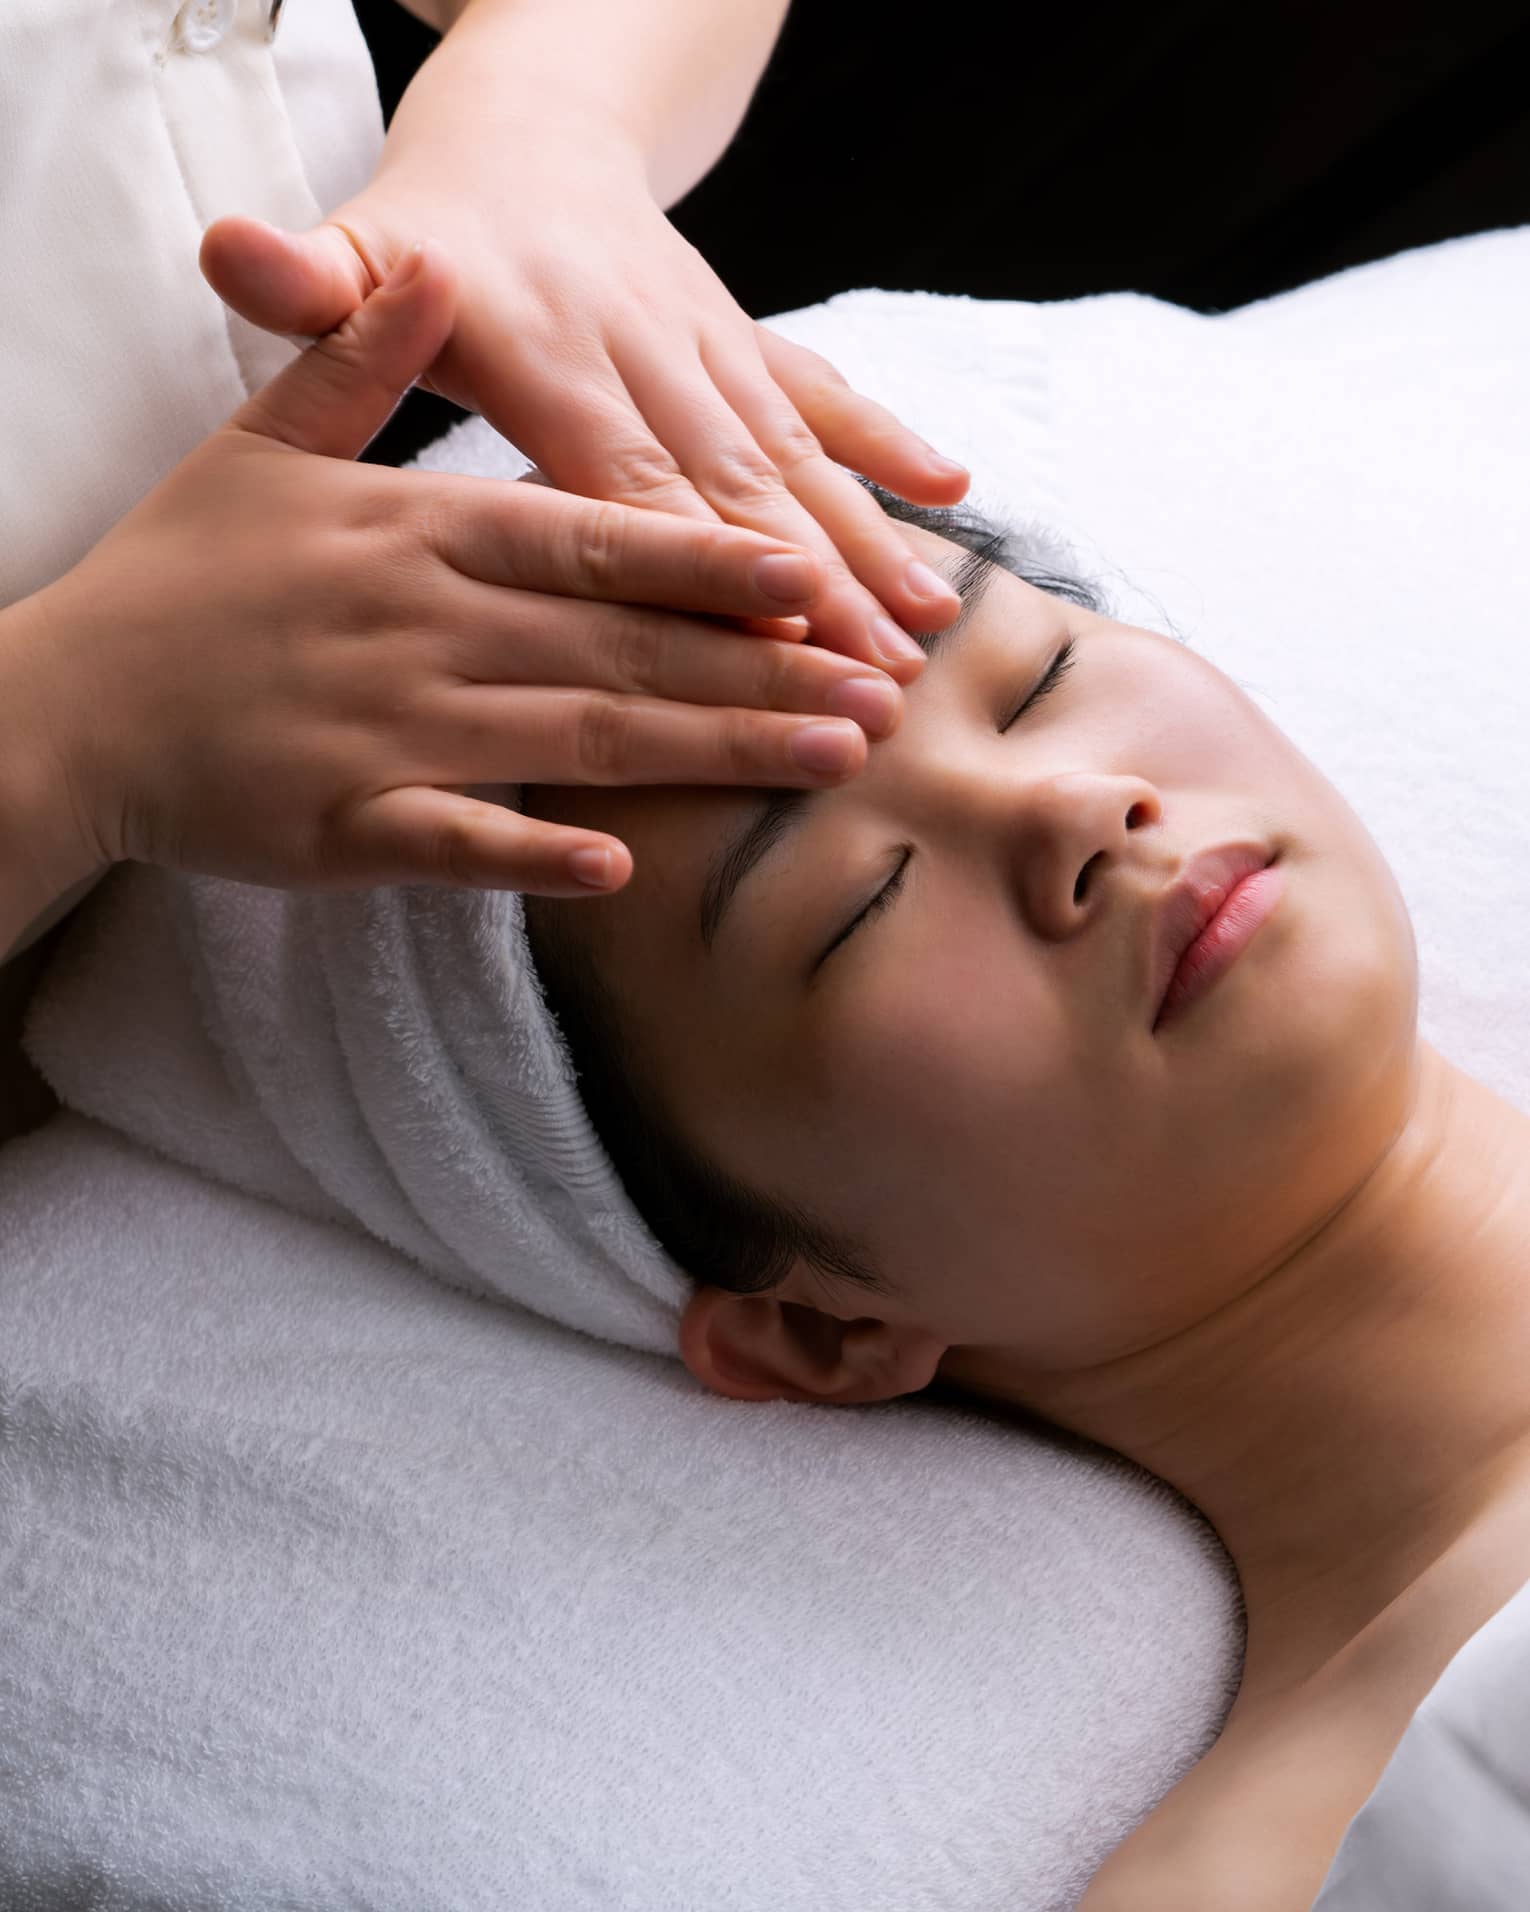 Spa staff places hands on woman's forehead during Anti-Oxidant Facial